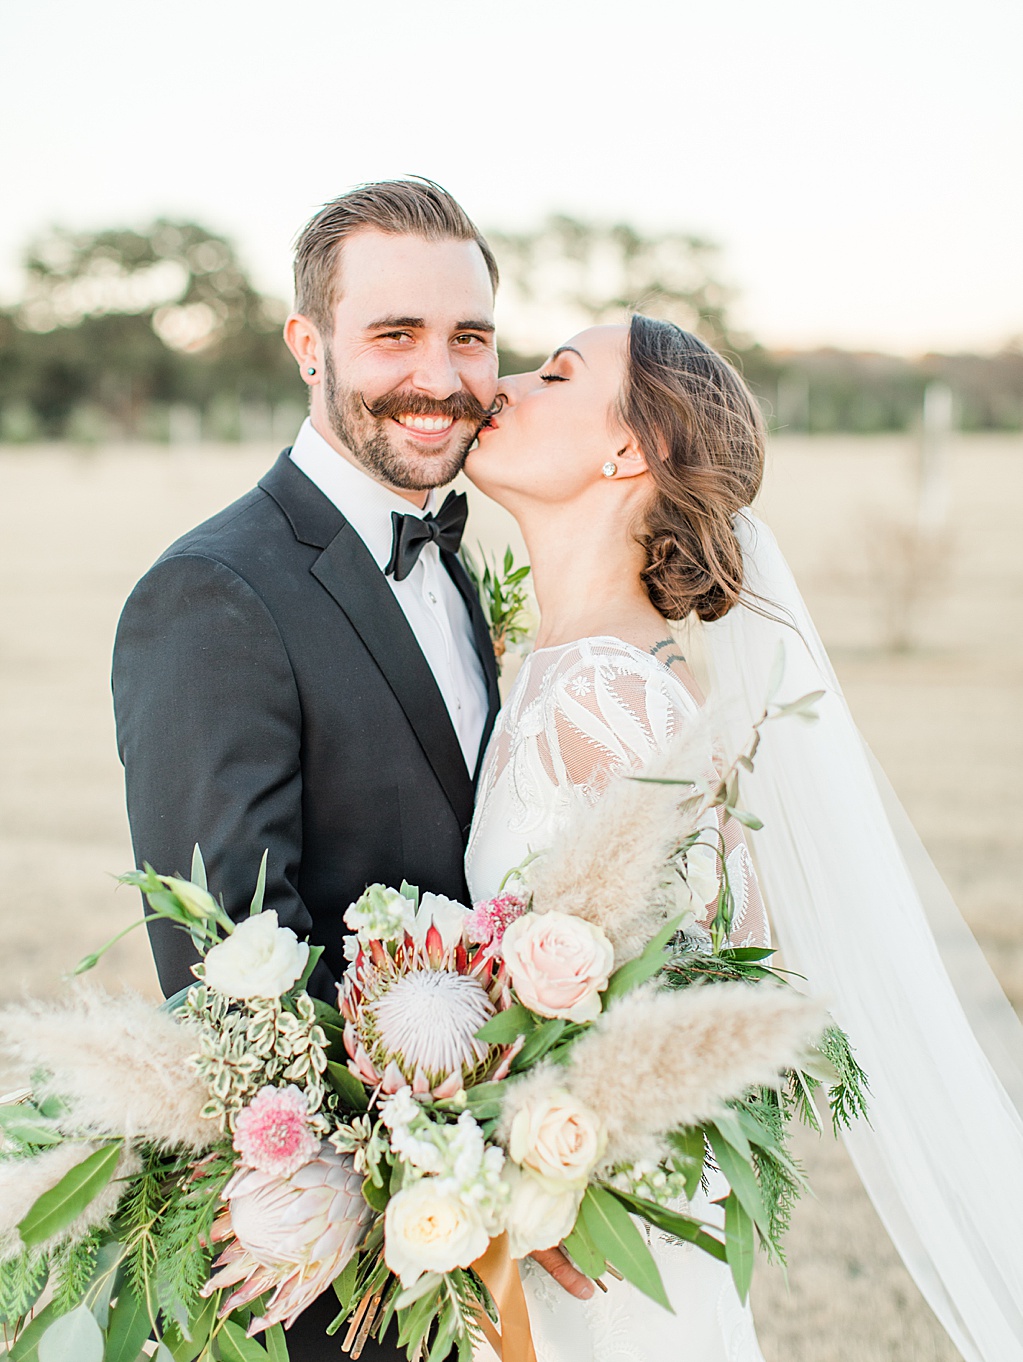 Hill Country Wedding at Turtle Creek Olive Grove wedding venue in Kerrville Texas by Wedding Photographer Allison Jeffers 0099